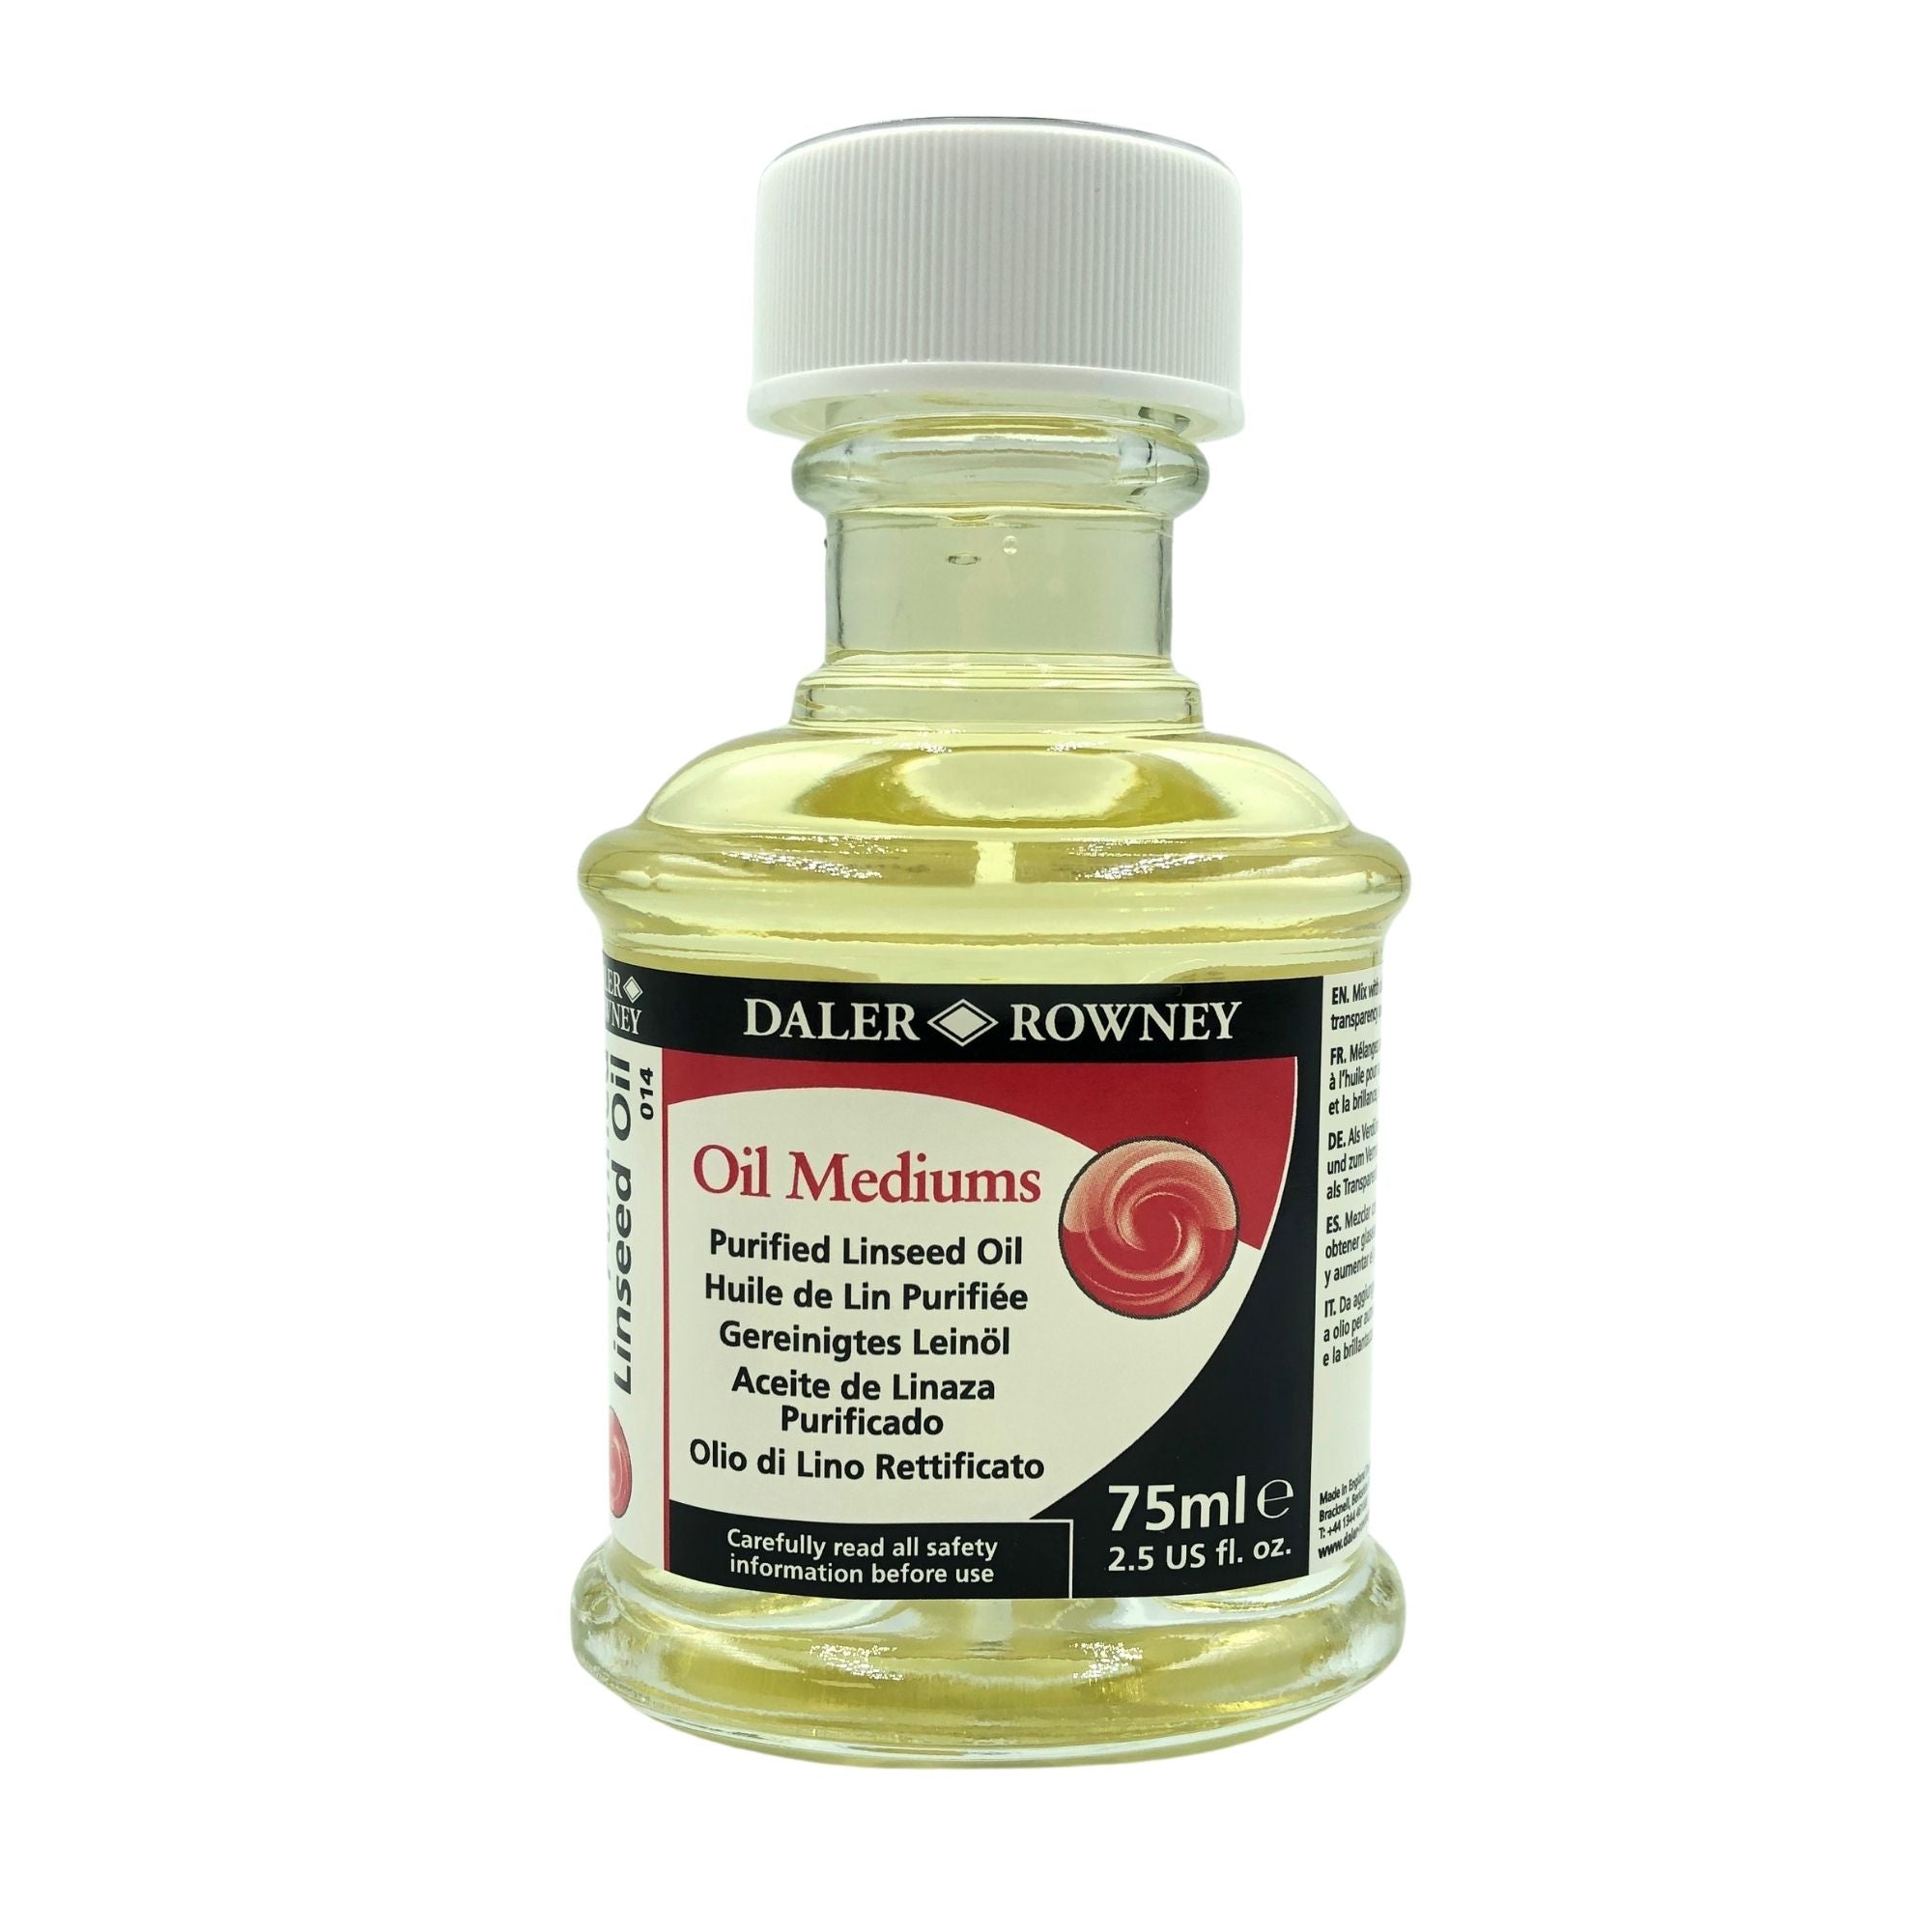 Daler-Rowney Purified Linseed Oil